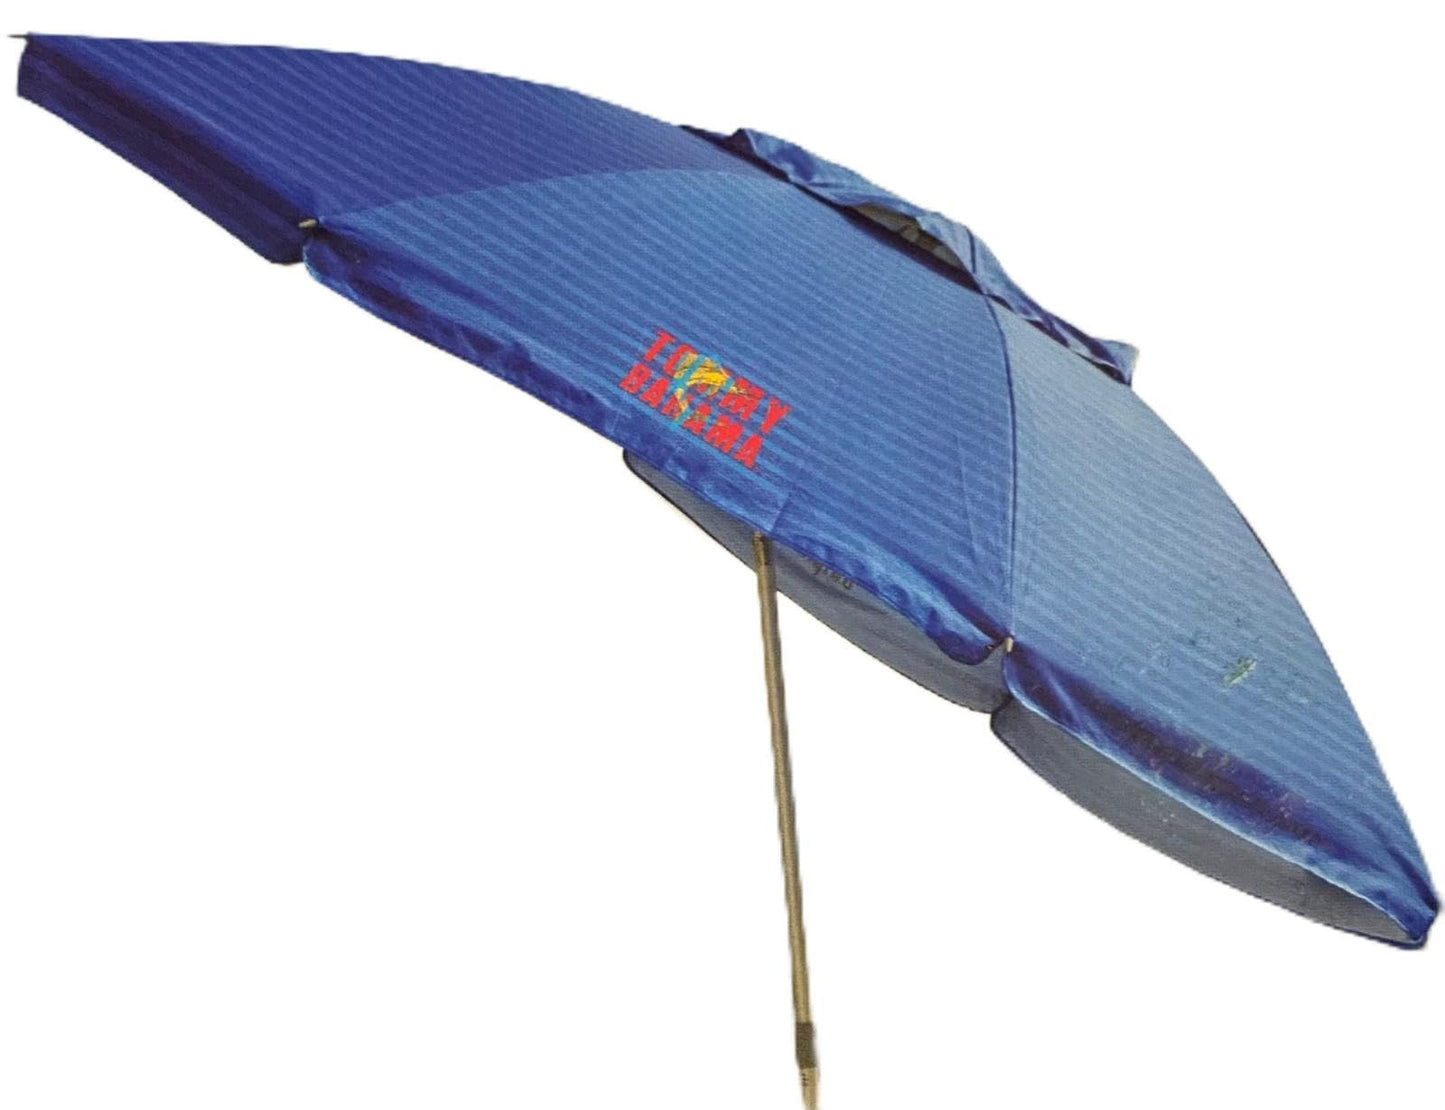 Tommy Bahama 8 ft Beach Umbrella with wind vent and sand anchor- Rich blue